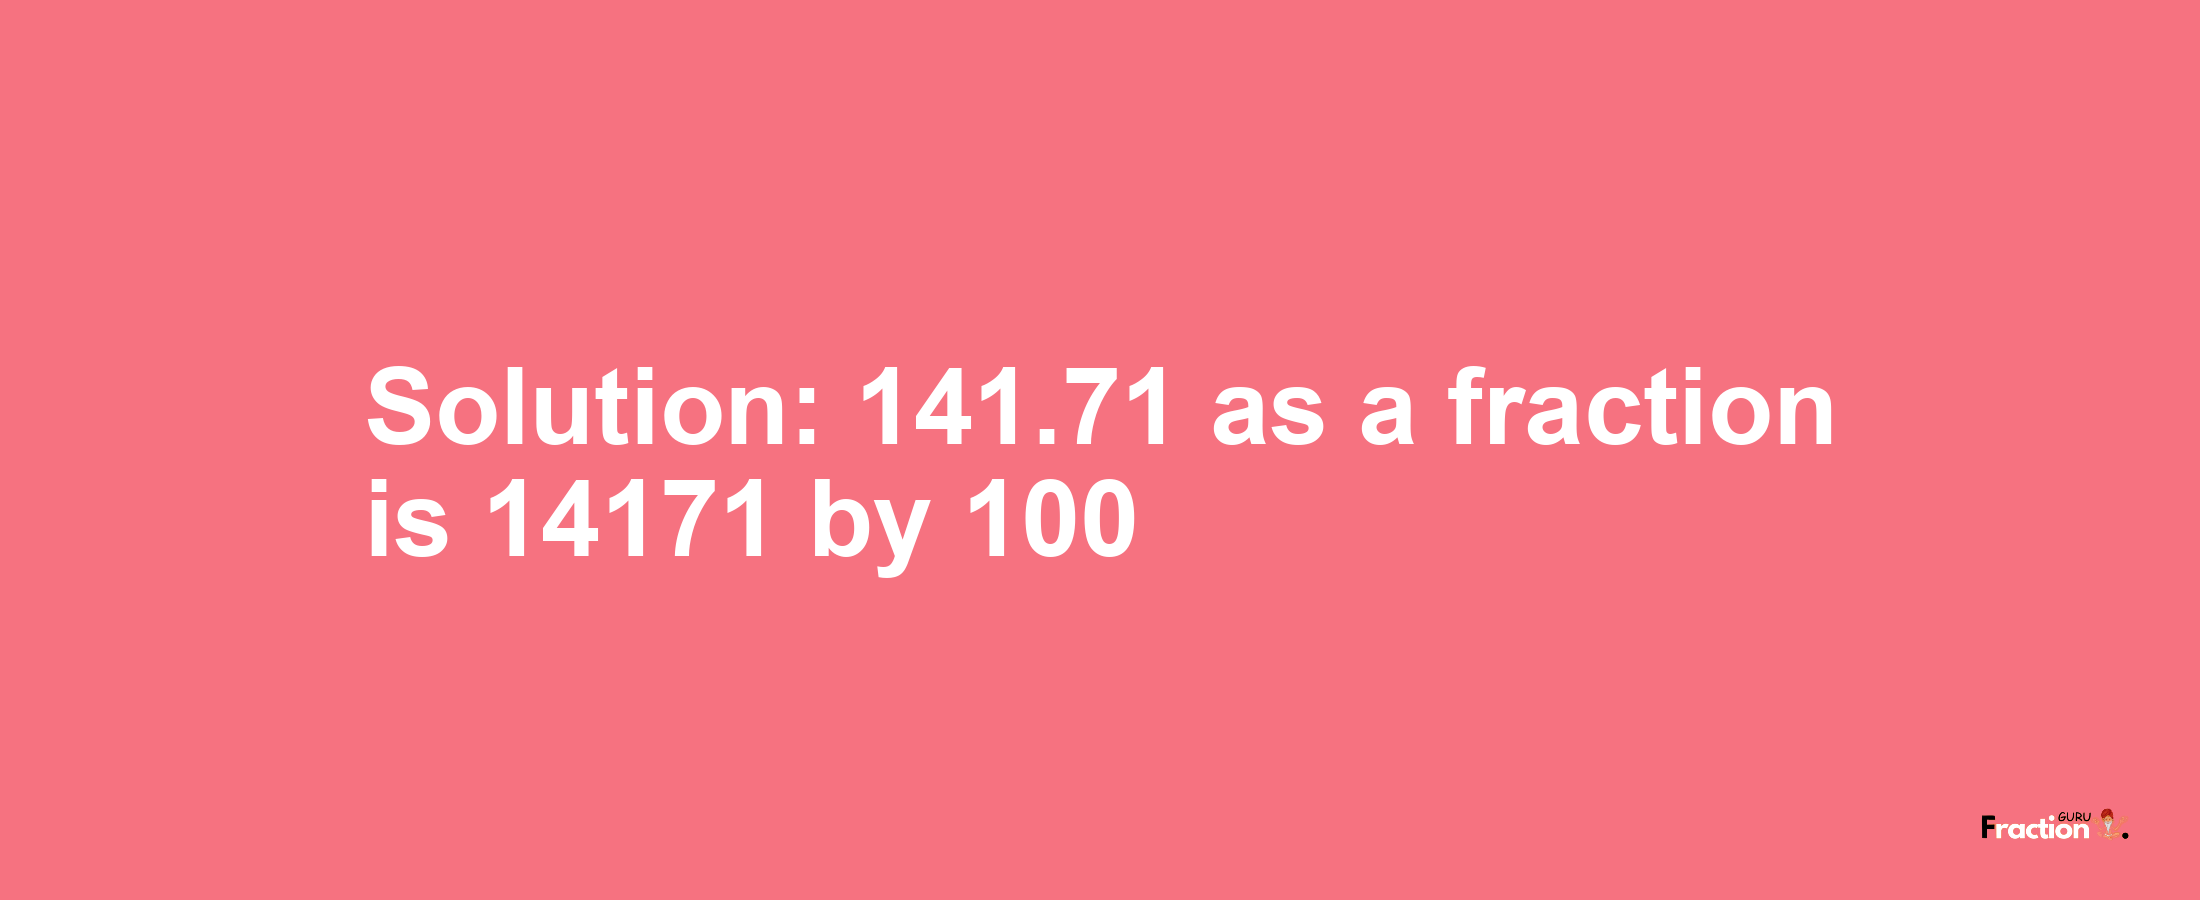 Solution:141.71 as a fraction is 14171/100